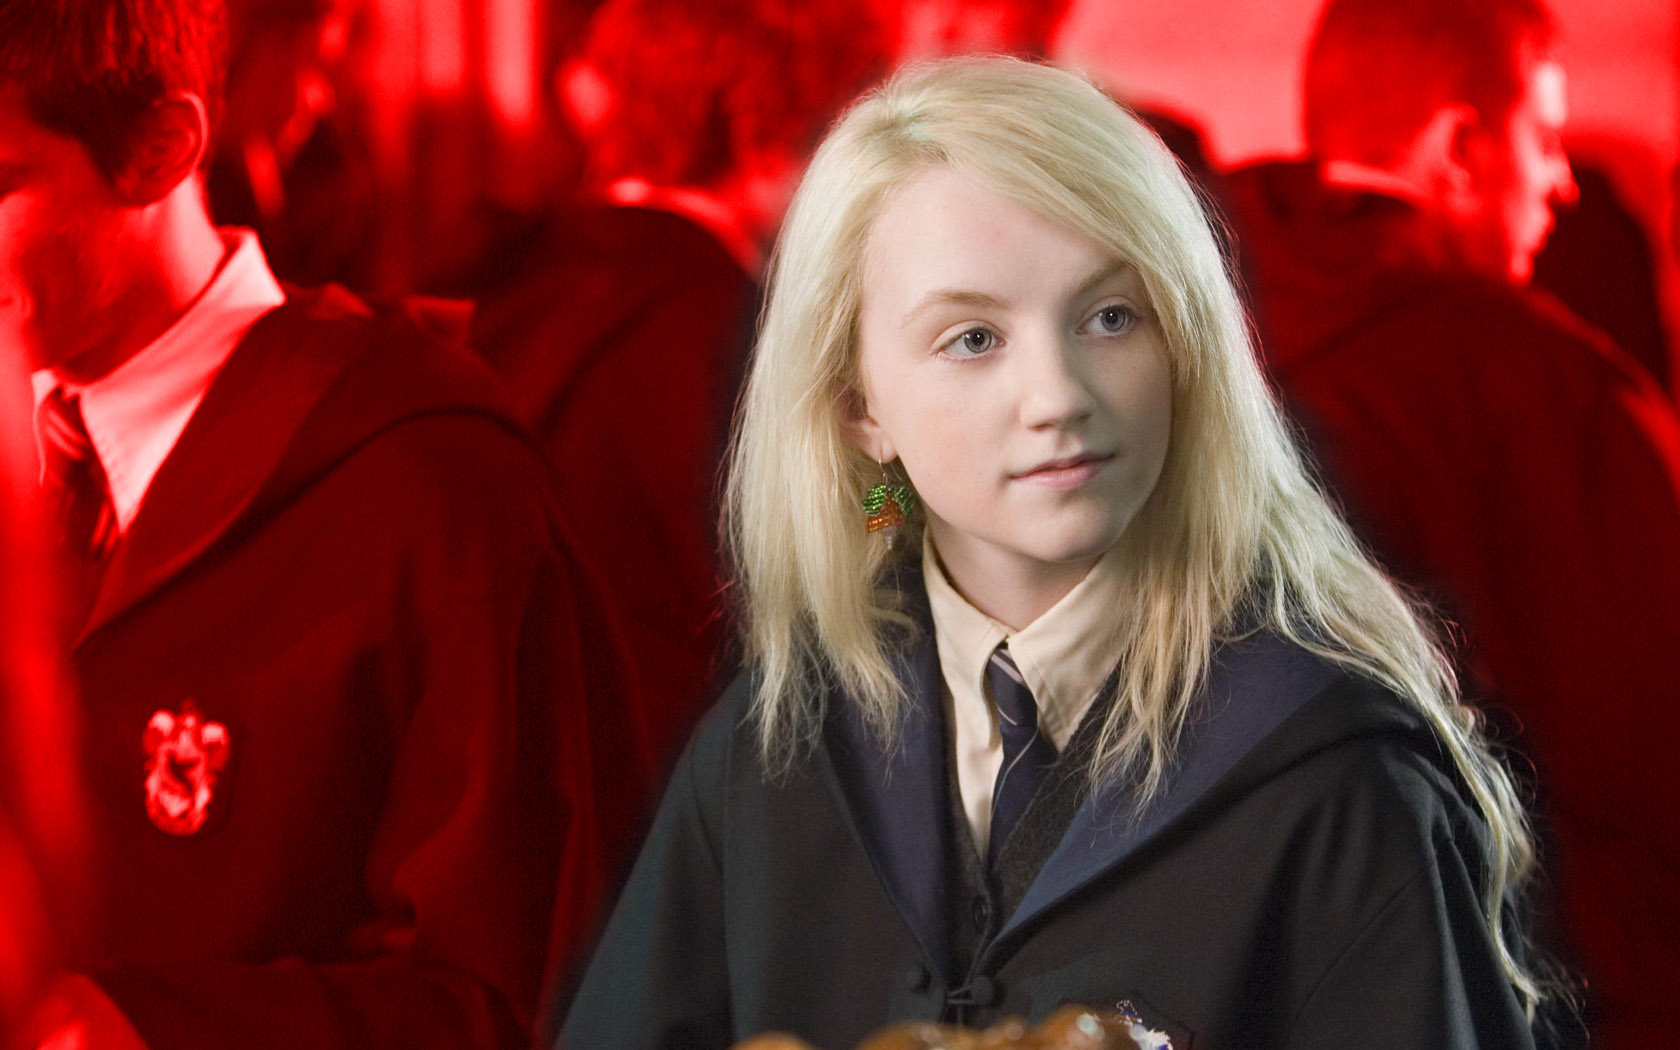 Evanna Lynch as Luna Lovegood, a character from Harry Potter